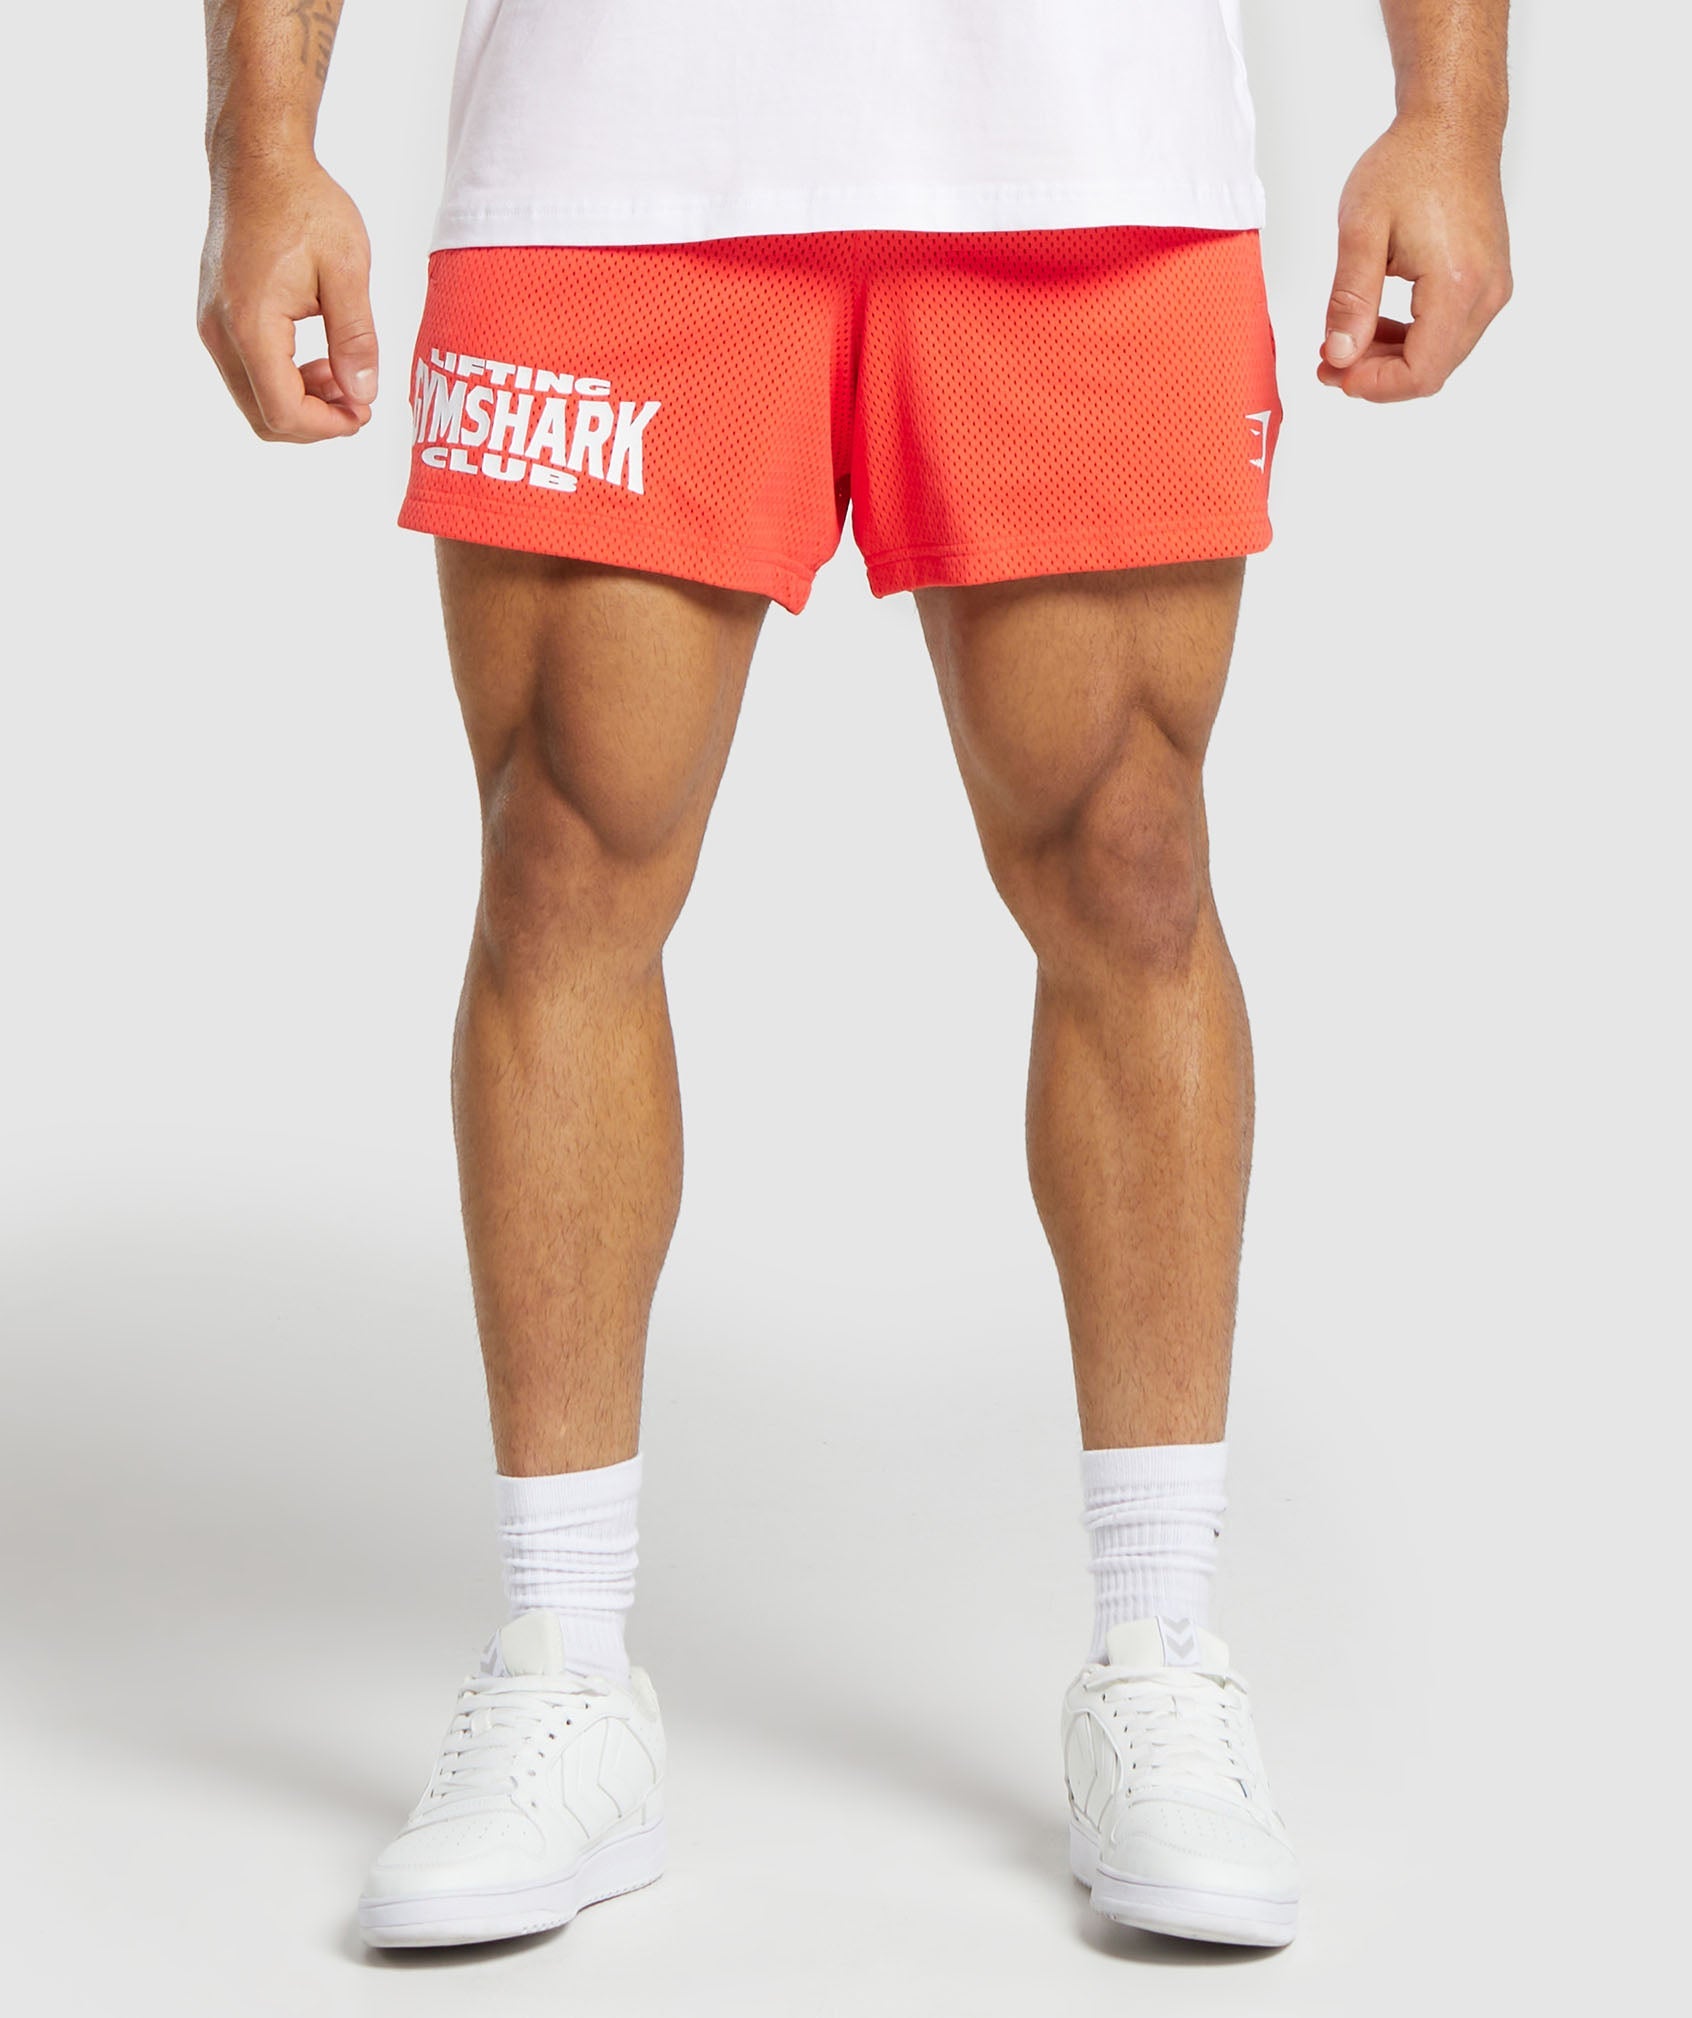 Lifting Club Mesh 5" Shorts in Wannabe Orange is out of stock